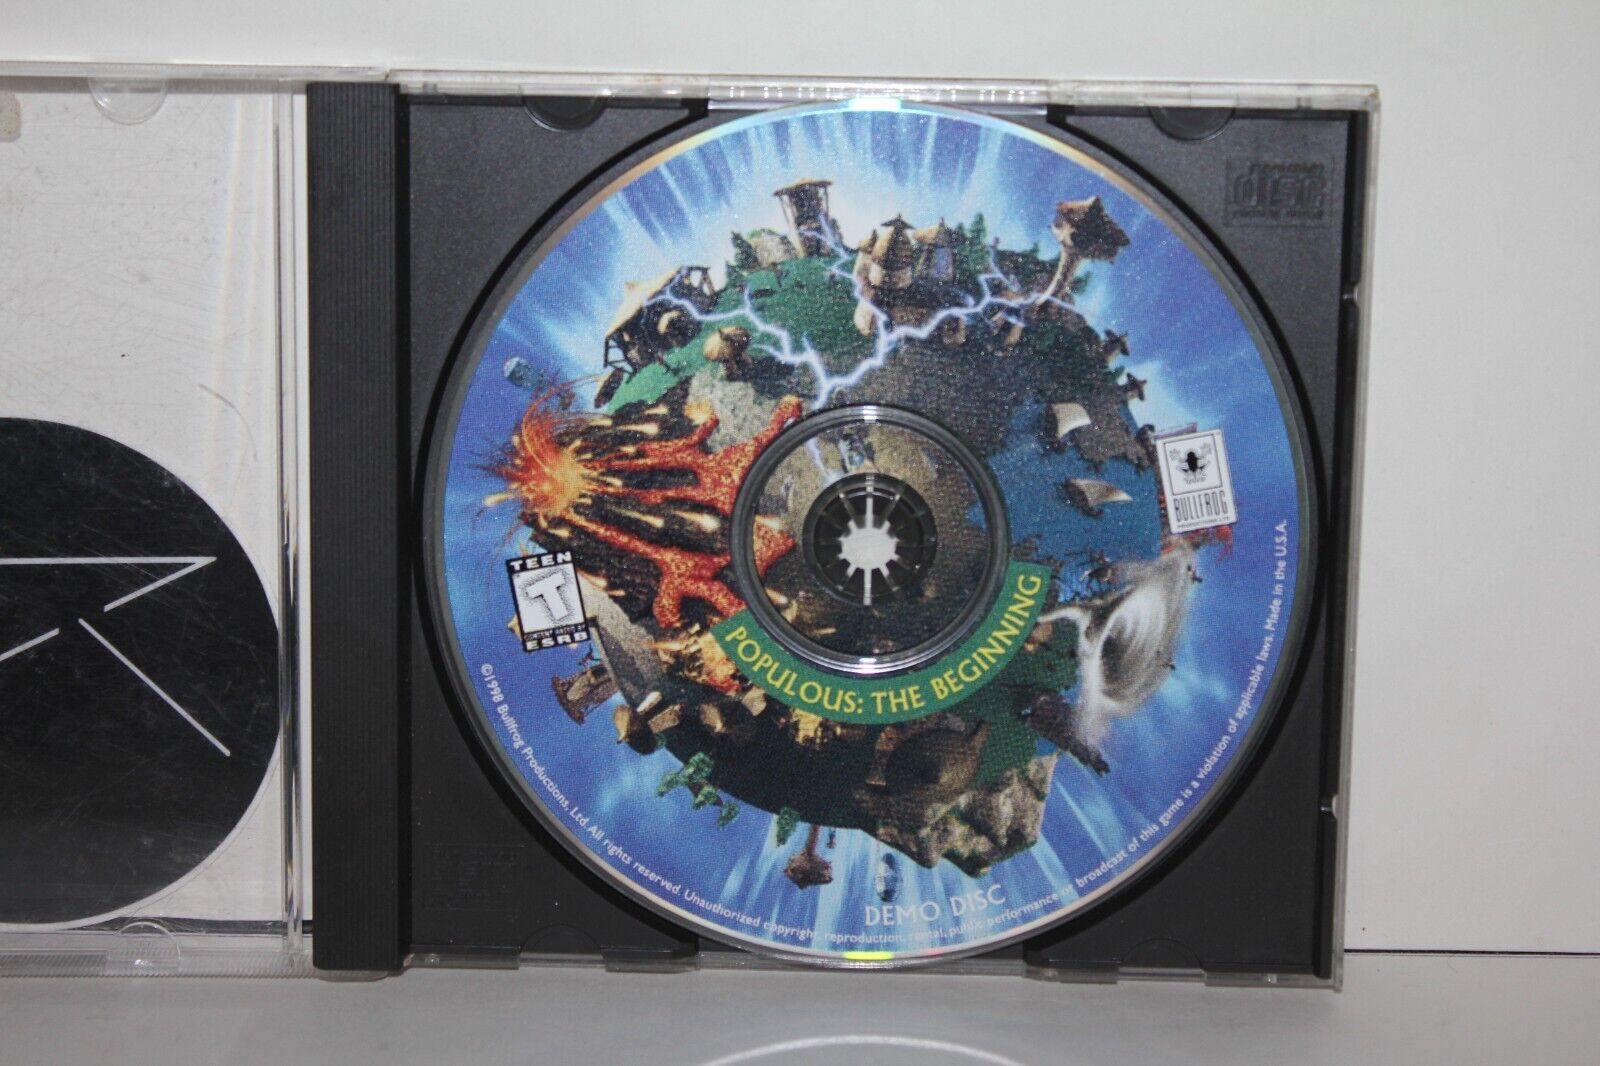 Populous: The Beginning DEMO Disc PC CD Windows game software  